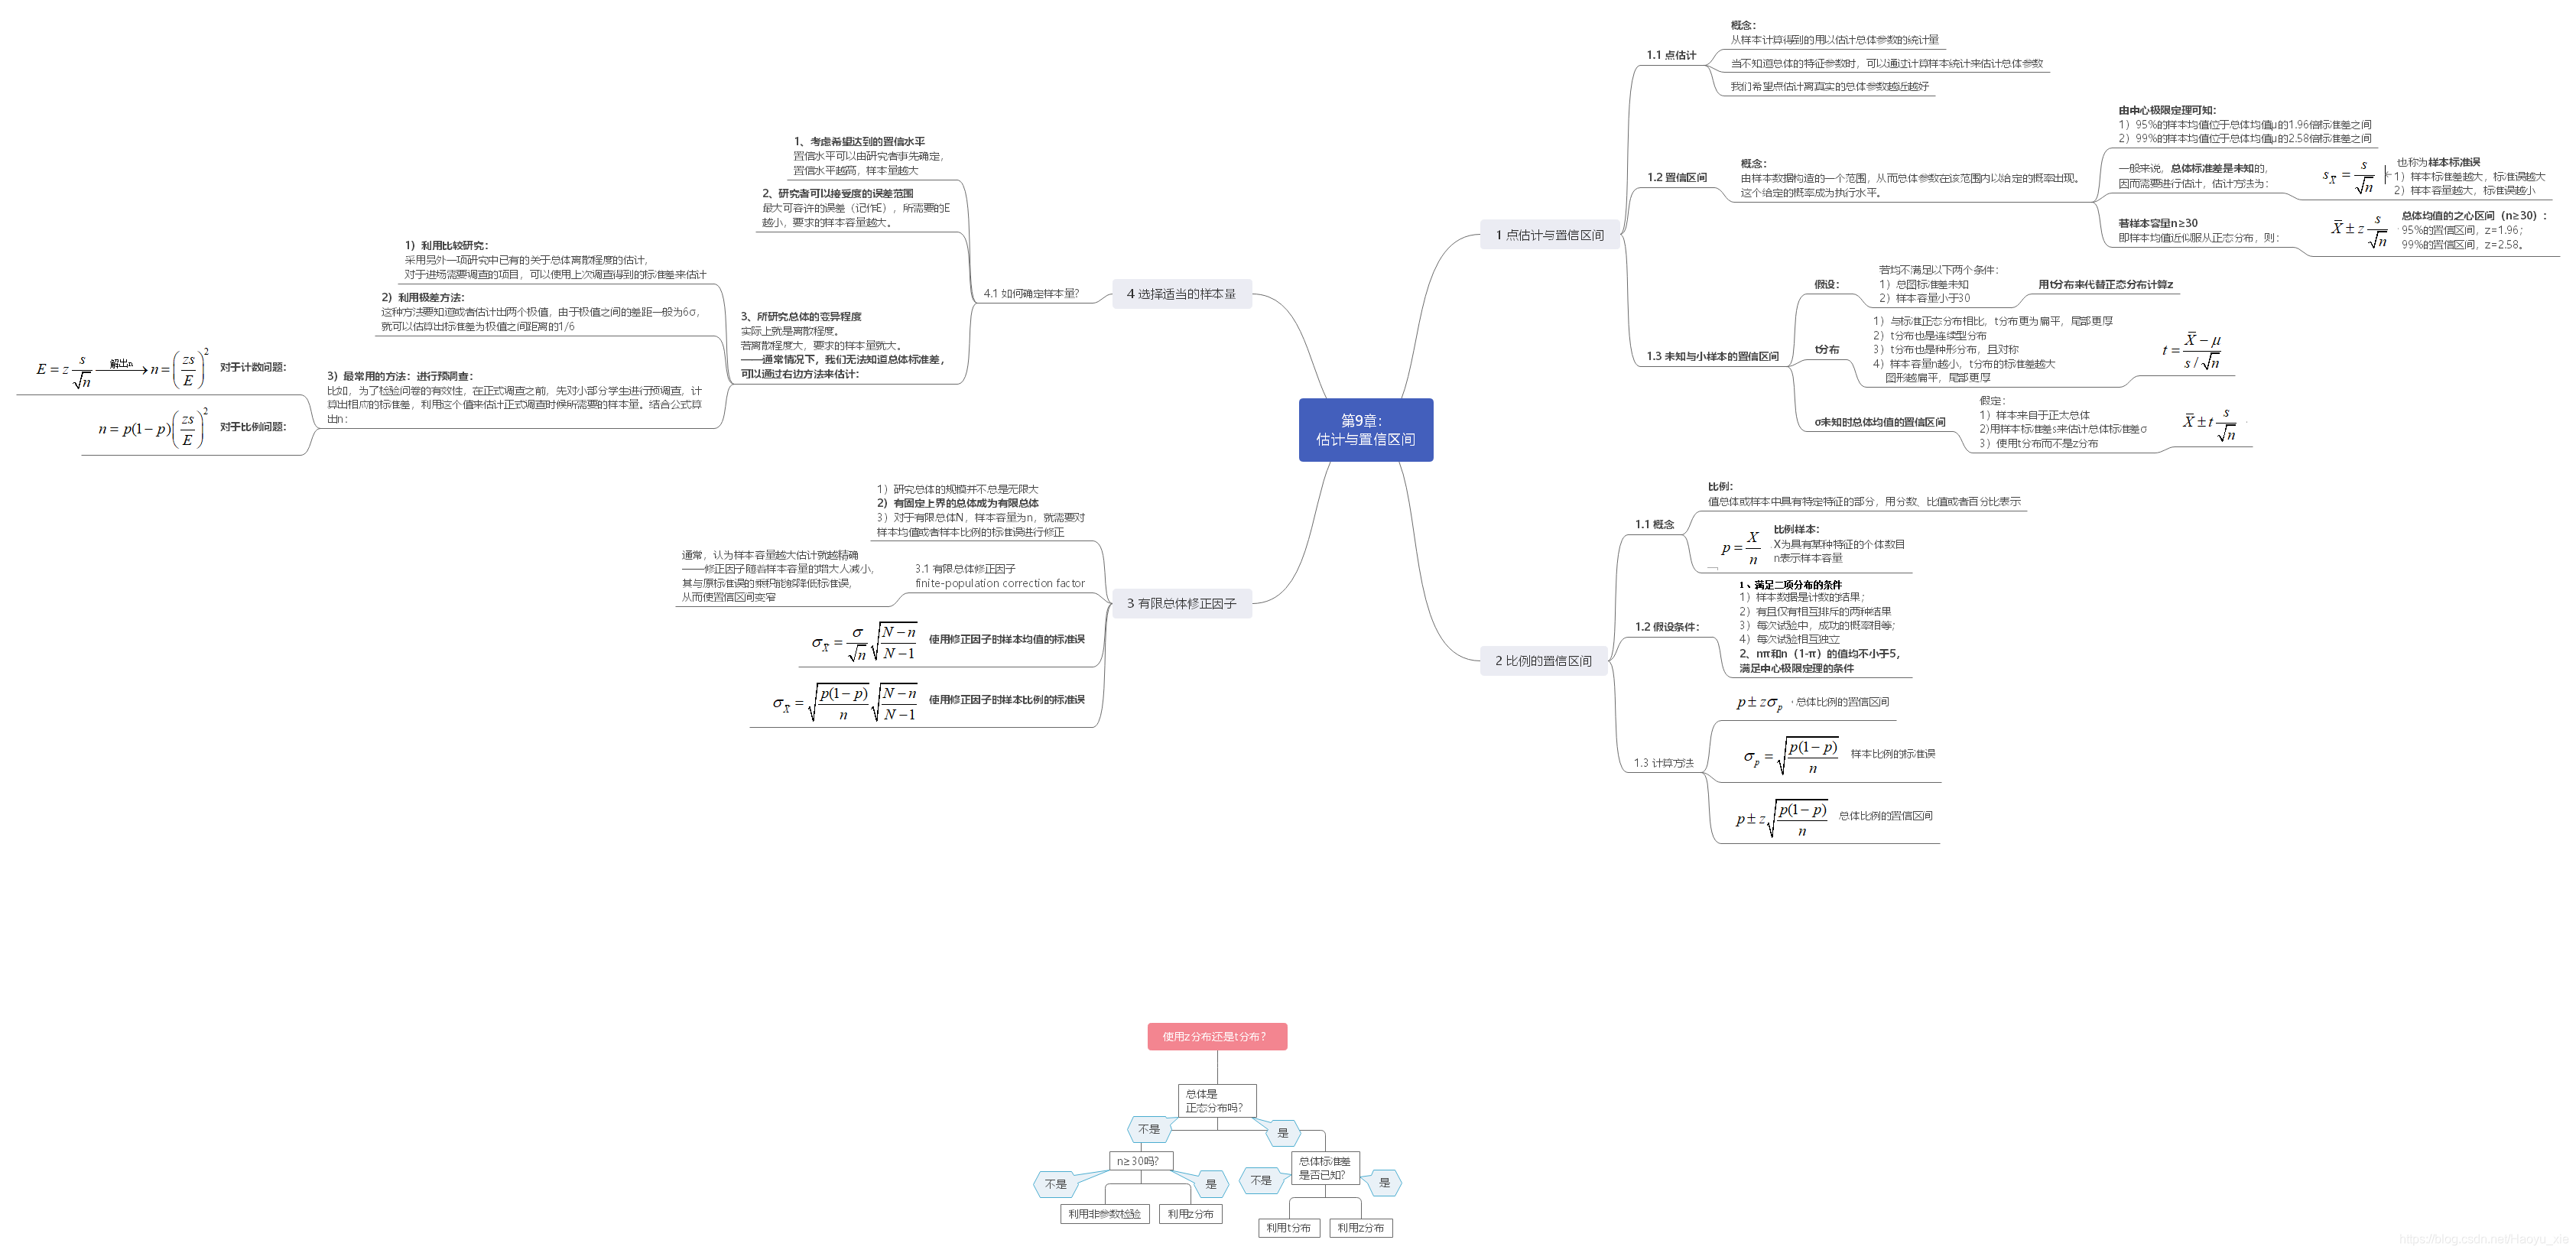 Chapter9: Mind Map